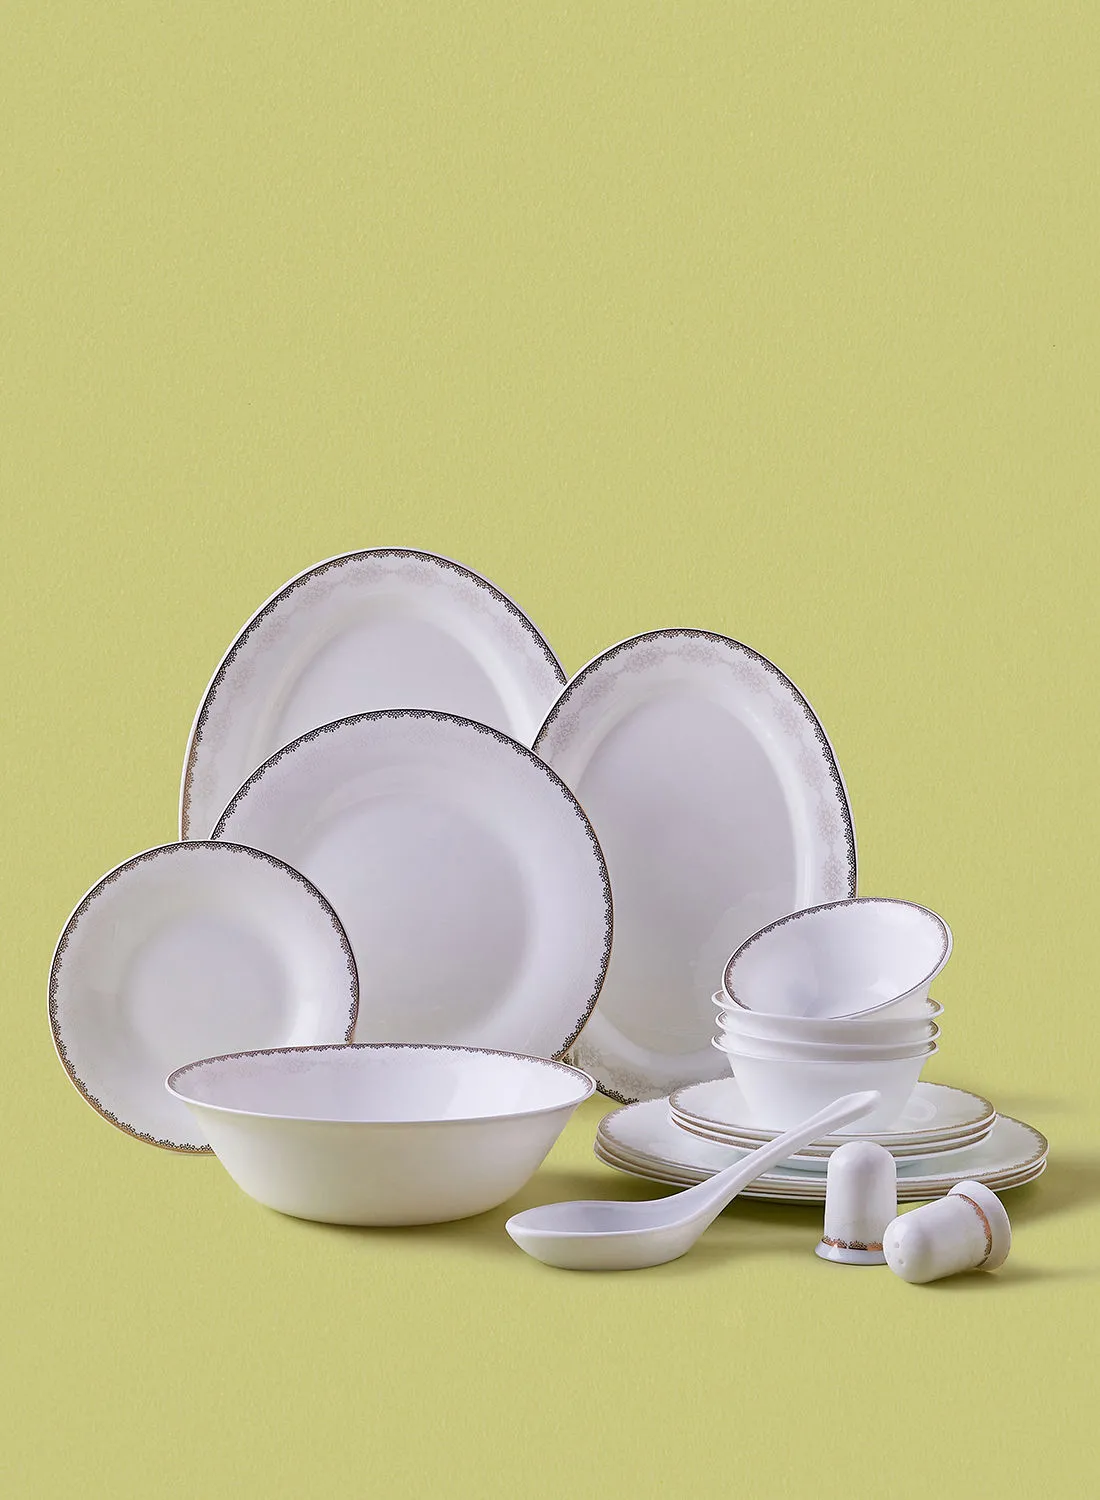 noon east 18 Piece Opalware Dinner Set - Light Weight Dishes, Plates - Dinner Plate, Side Plate, Bowl, Serving Dish And Bowl - Serves 4 - Festive Design Lace Gold